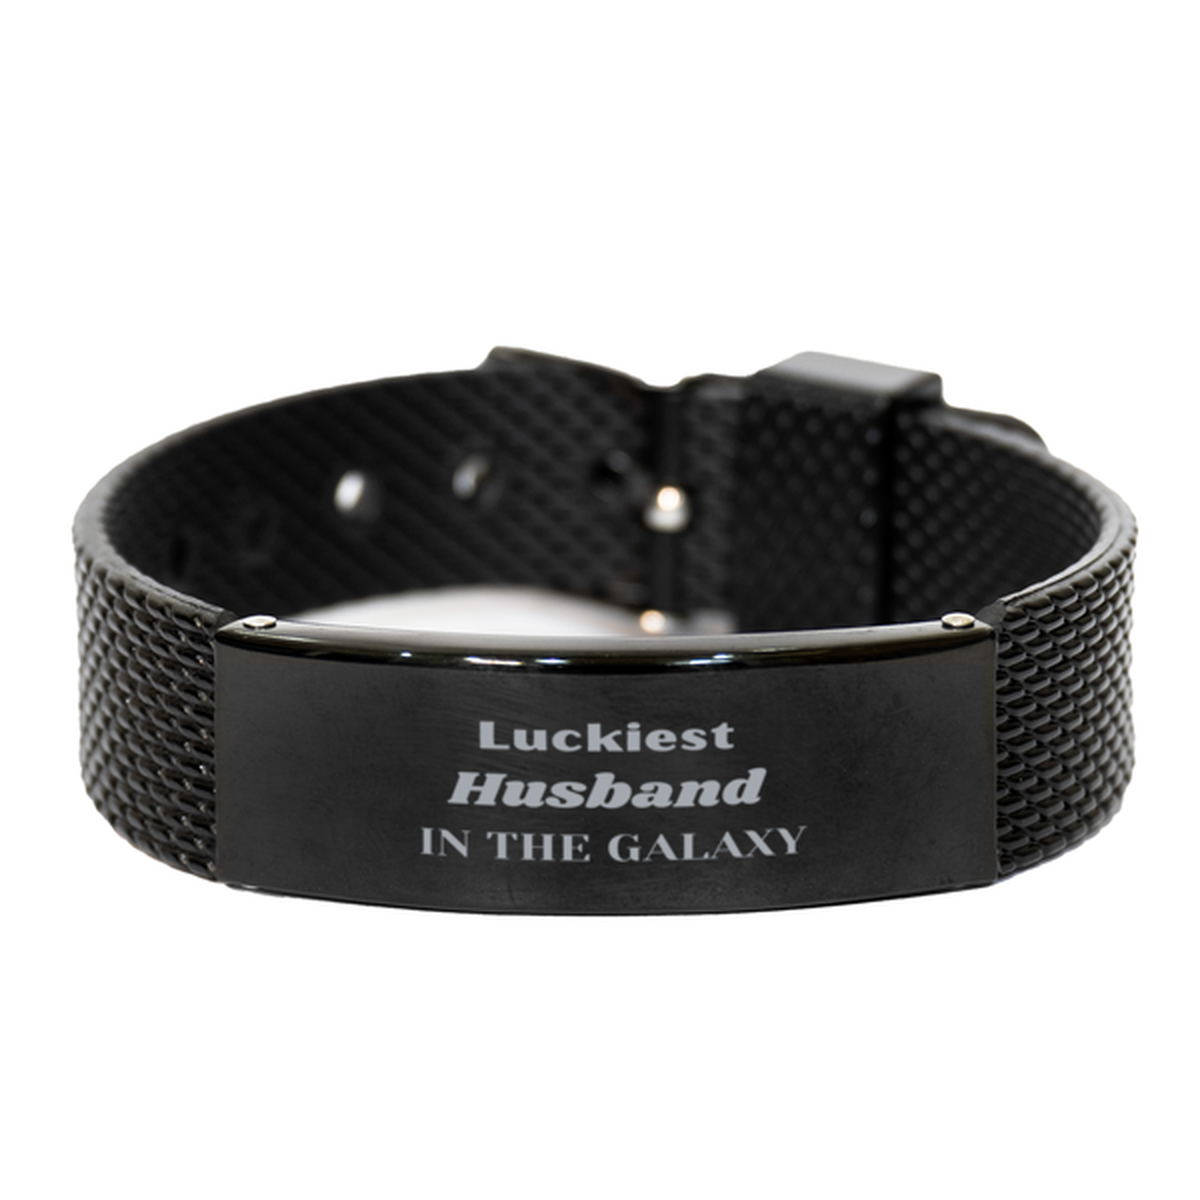 Luckiest Husband in the Galaxy, To My Husband Engraved Gifts, Christmas Husband Black Shark Mesh Bracelet Gifts, X-mas Birthday Unique Gifts For Husband Men Women